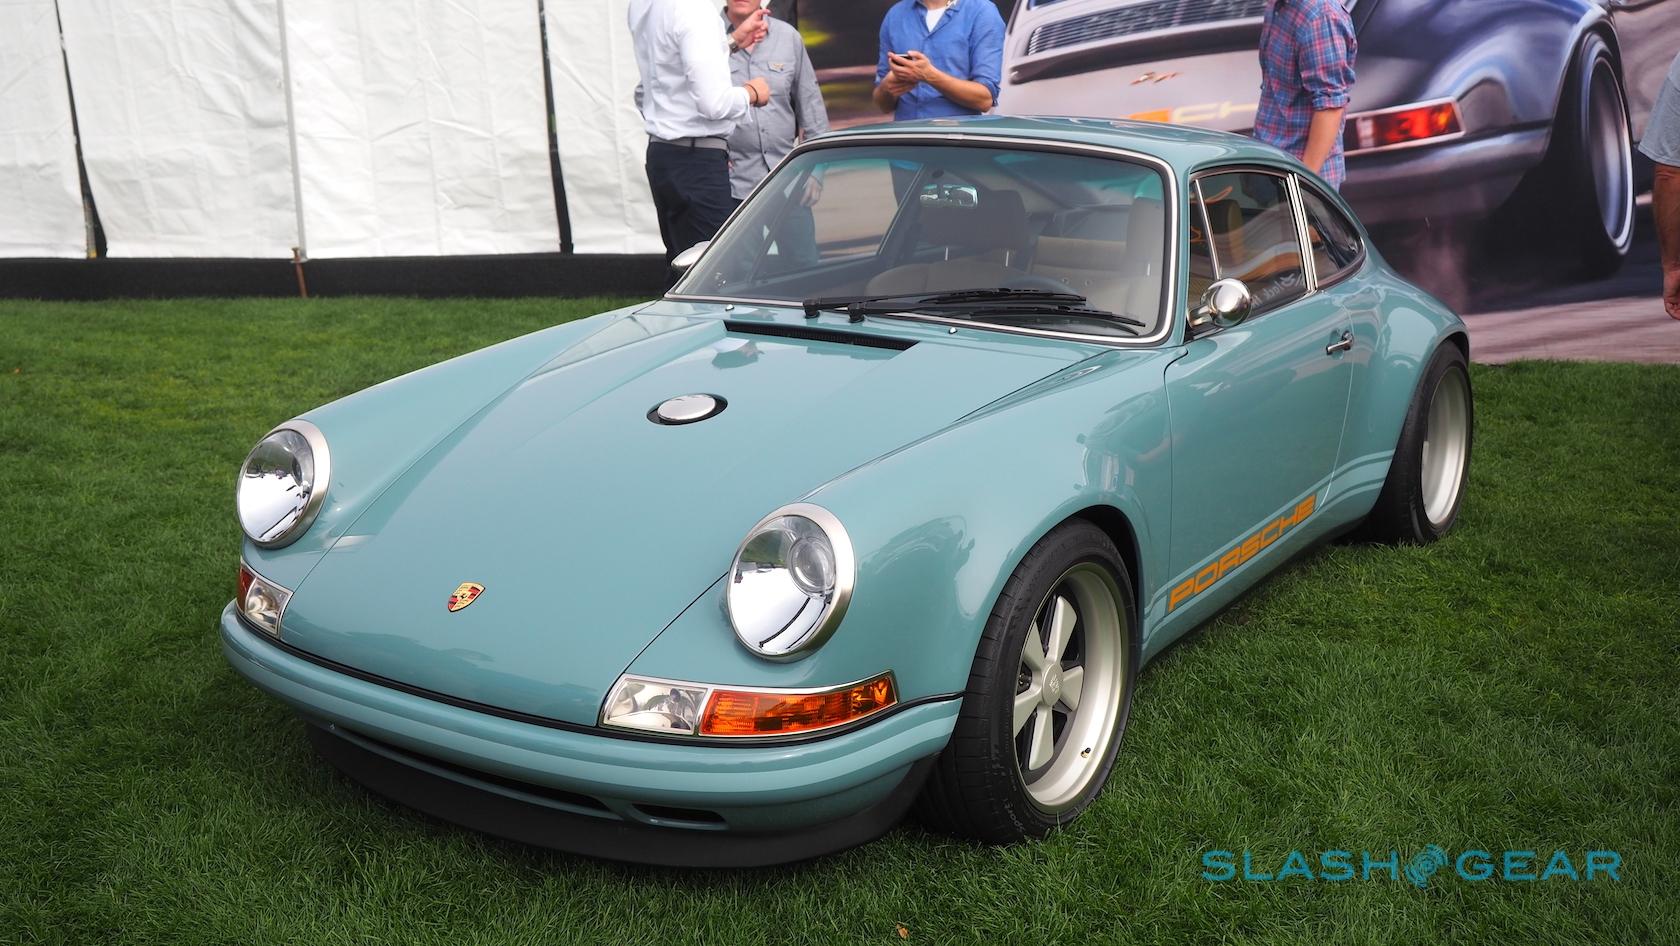 Porsche 911 Reimagined By Singer The Florida Car Gallery